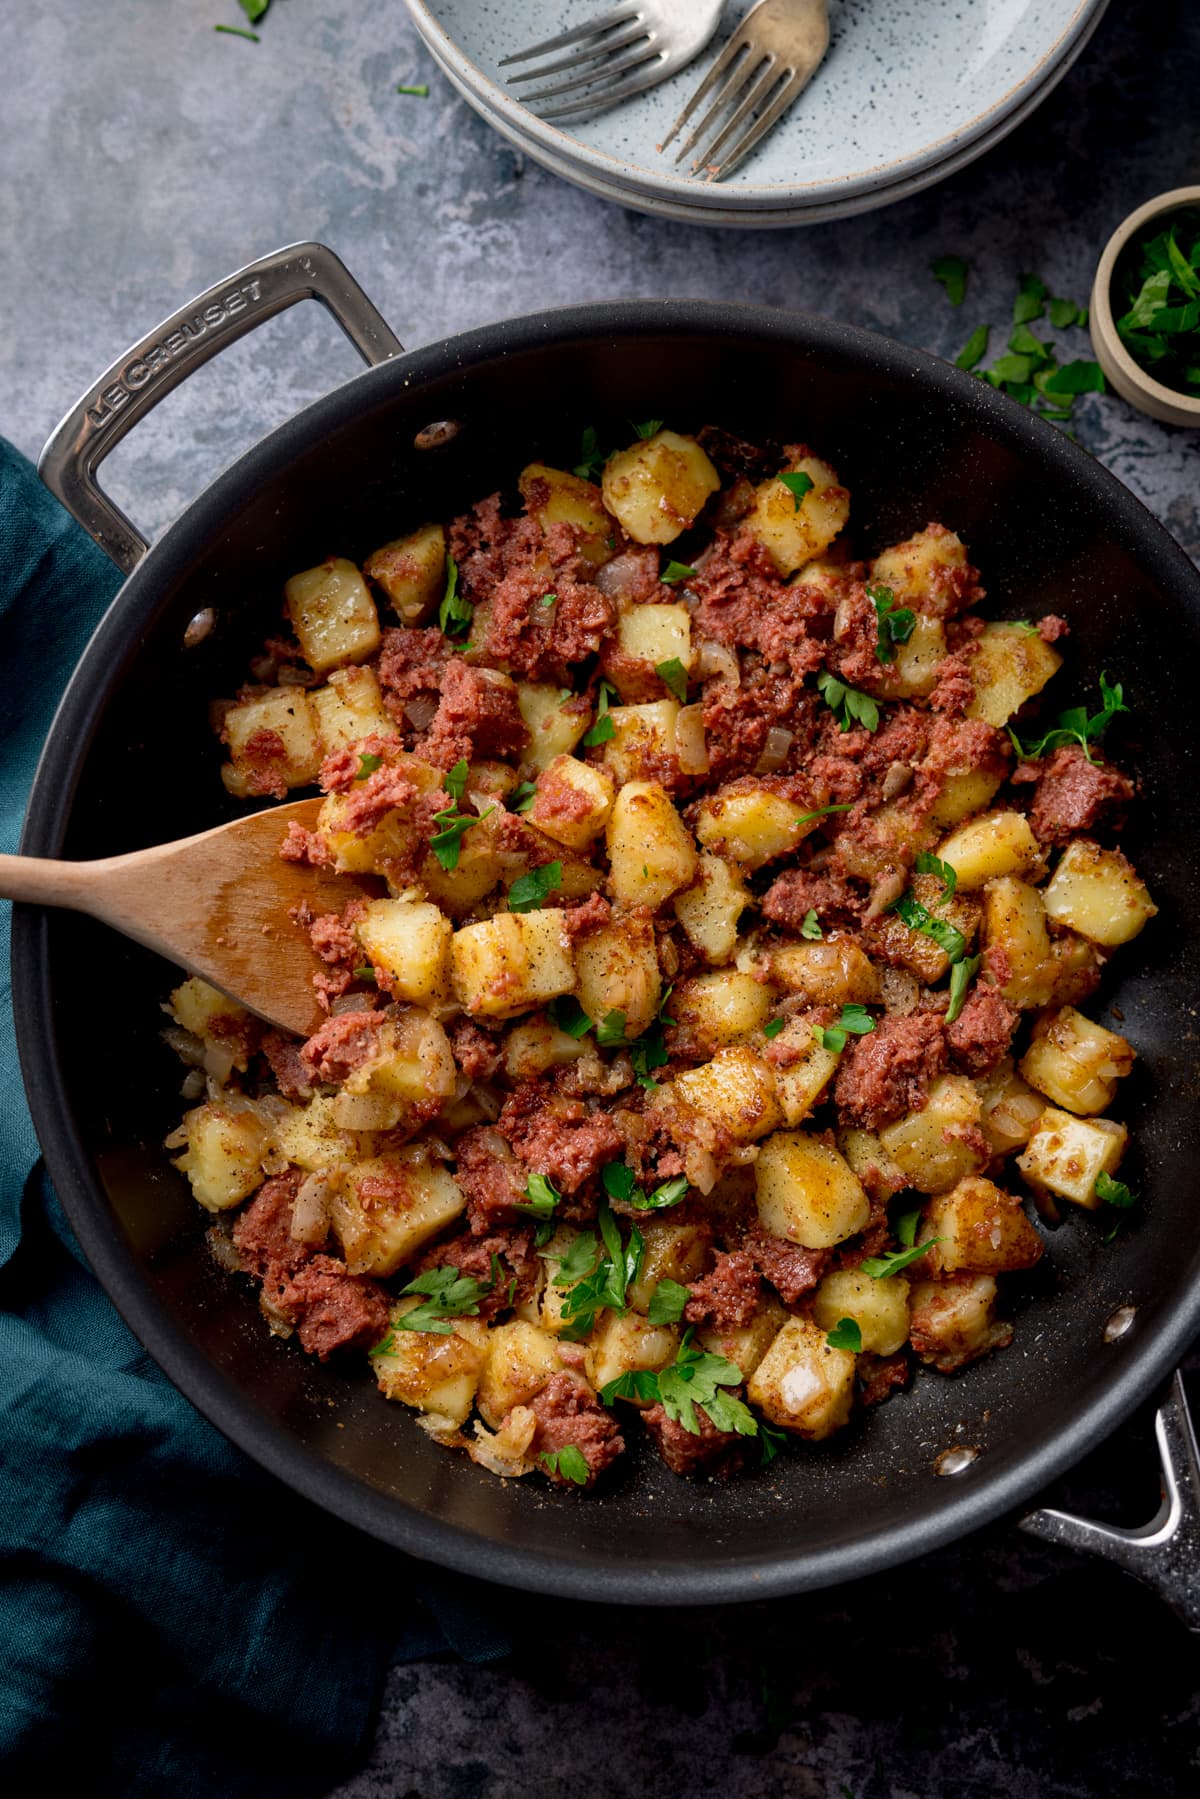 Tall overhead image of corned beef hash in a frying pan with a wooden spoon sticking out. There is parsley sprinkled on top. The pan in on a grey surface next to a dark green napkin. There is a light bowl, a couple of forks and a little bowl with chopped parsley also in shot at the top of the image.